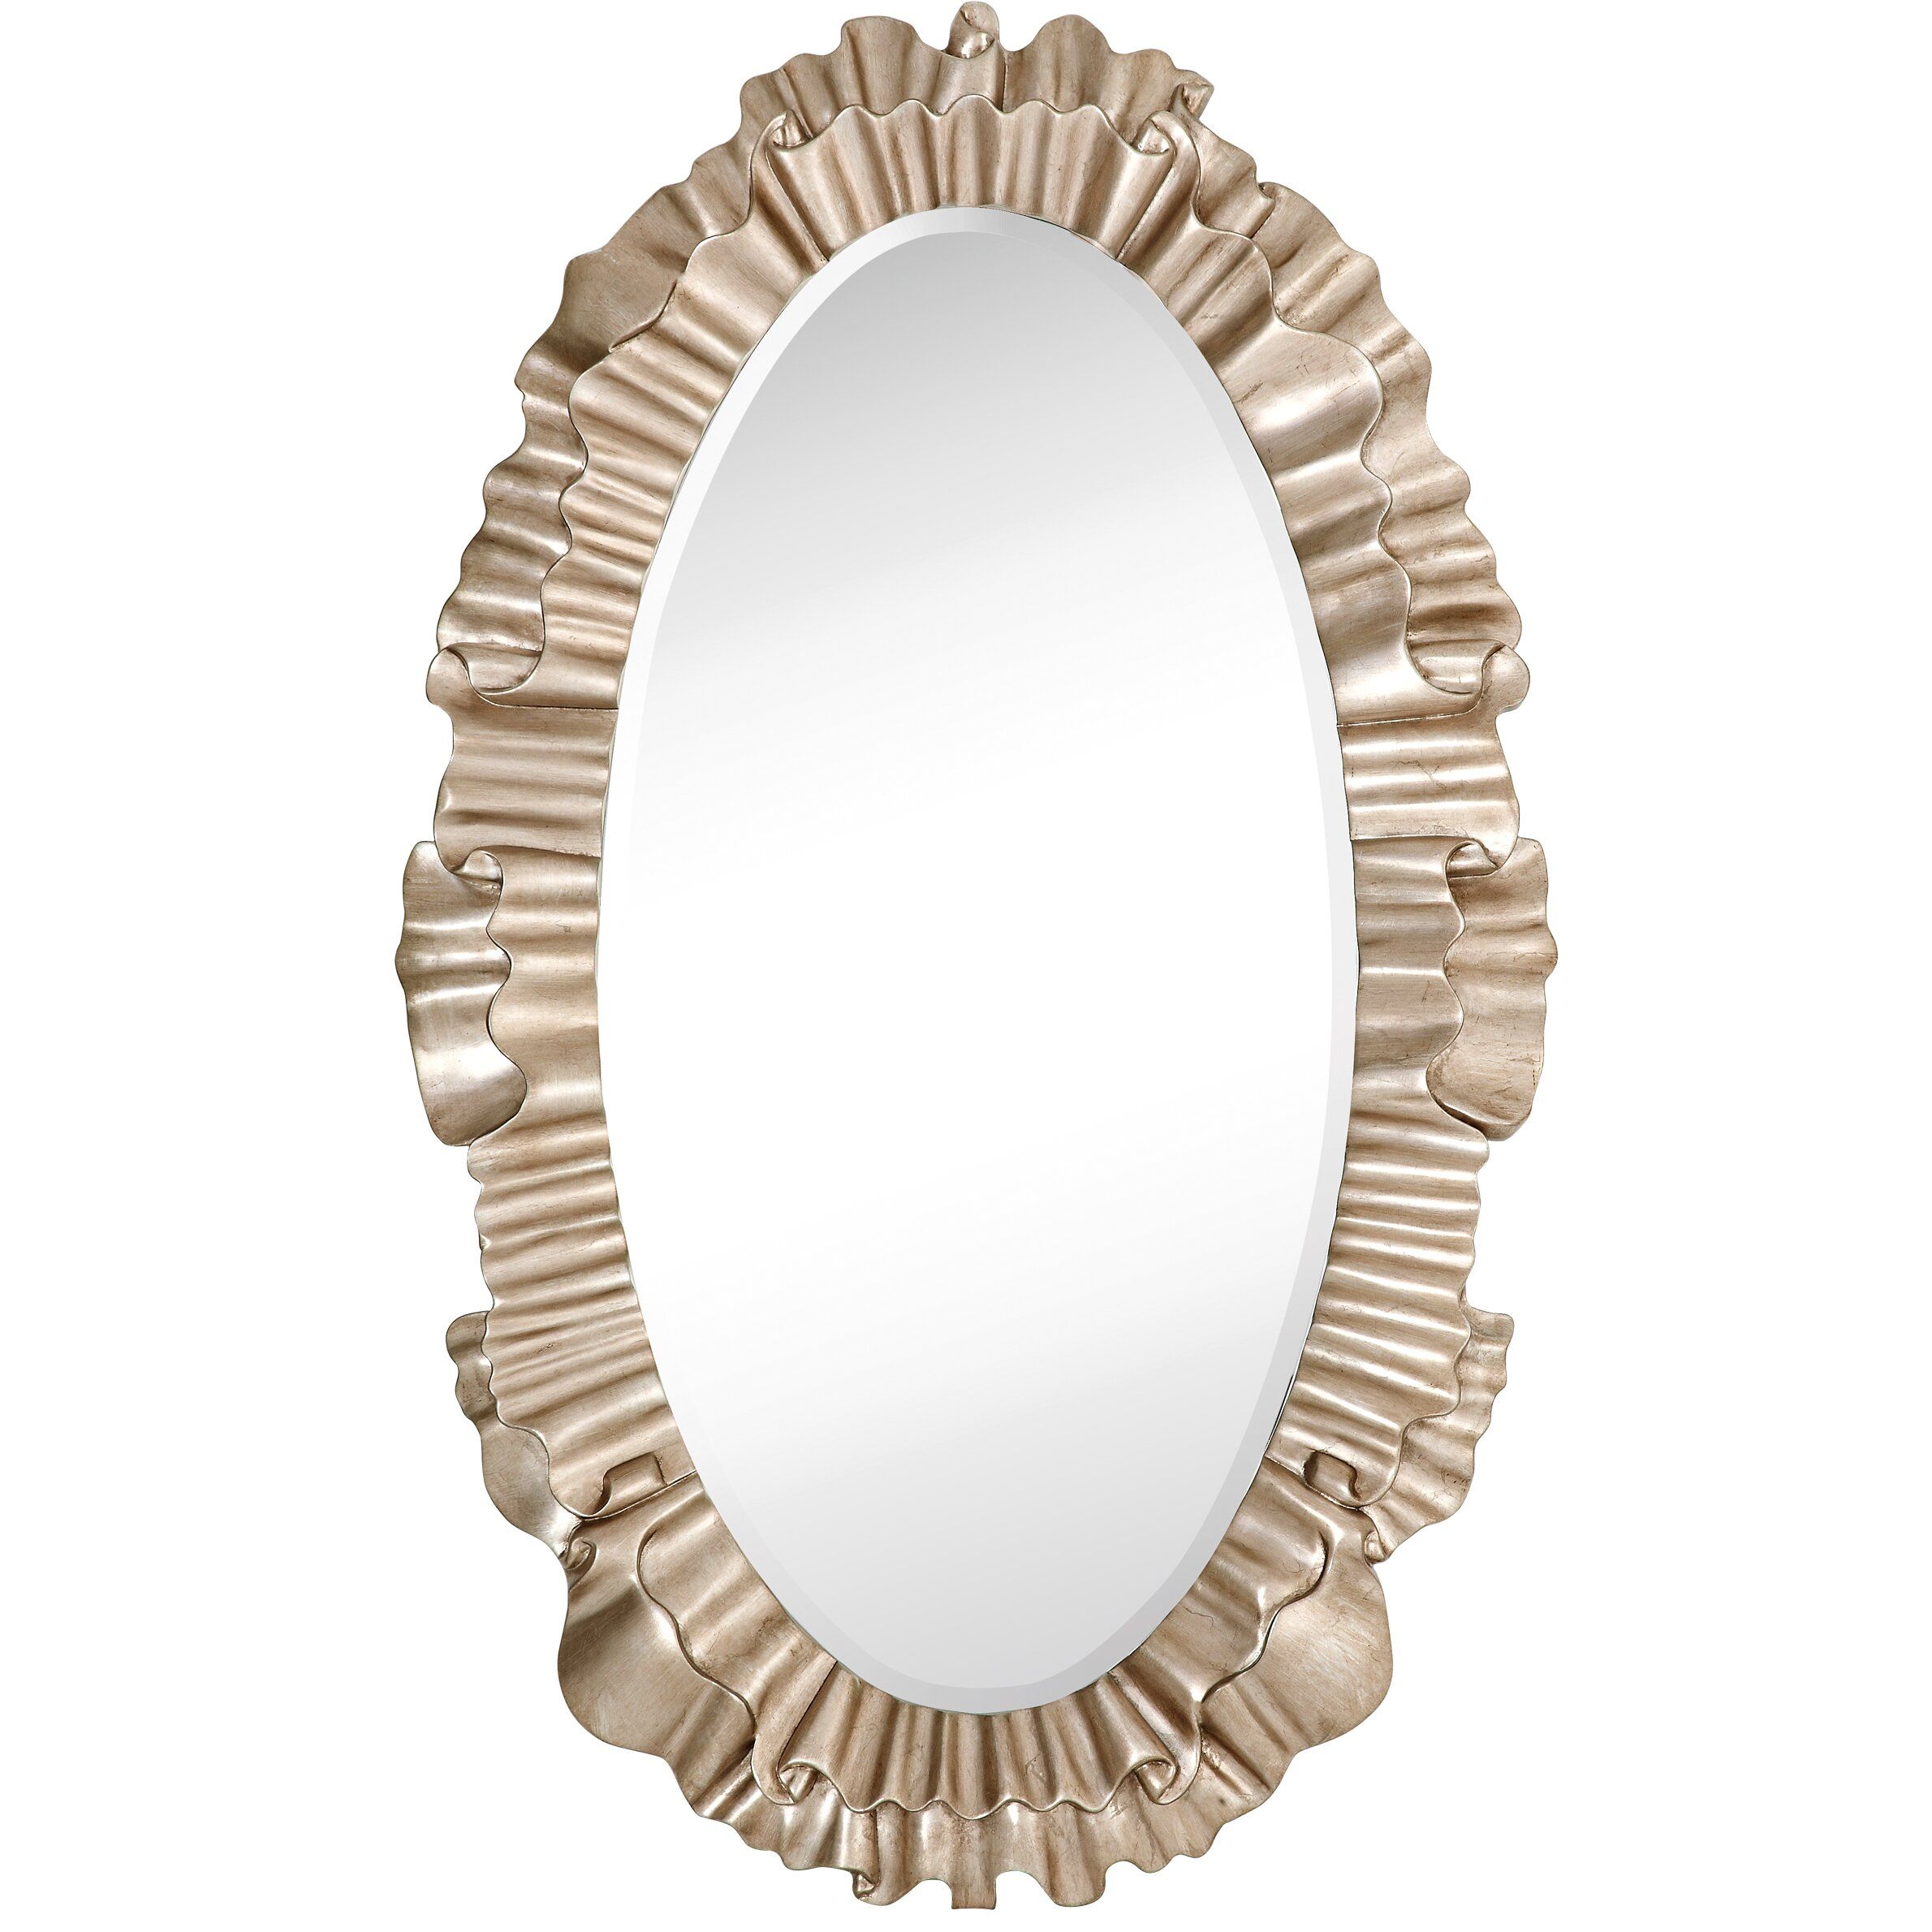 Majestic Mirror Oval Antique Silver Leaf Ornate Framed Beveled Glass Regarding Metallic Gold Leaf Wall Mirrors (View 6 of 15)